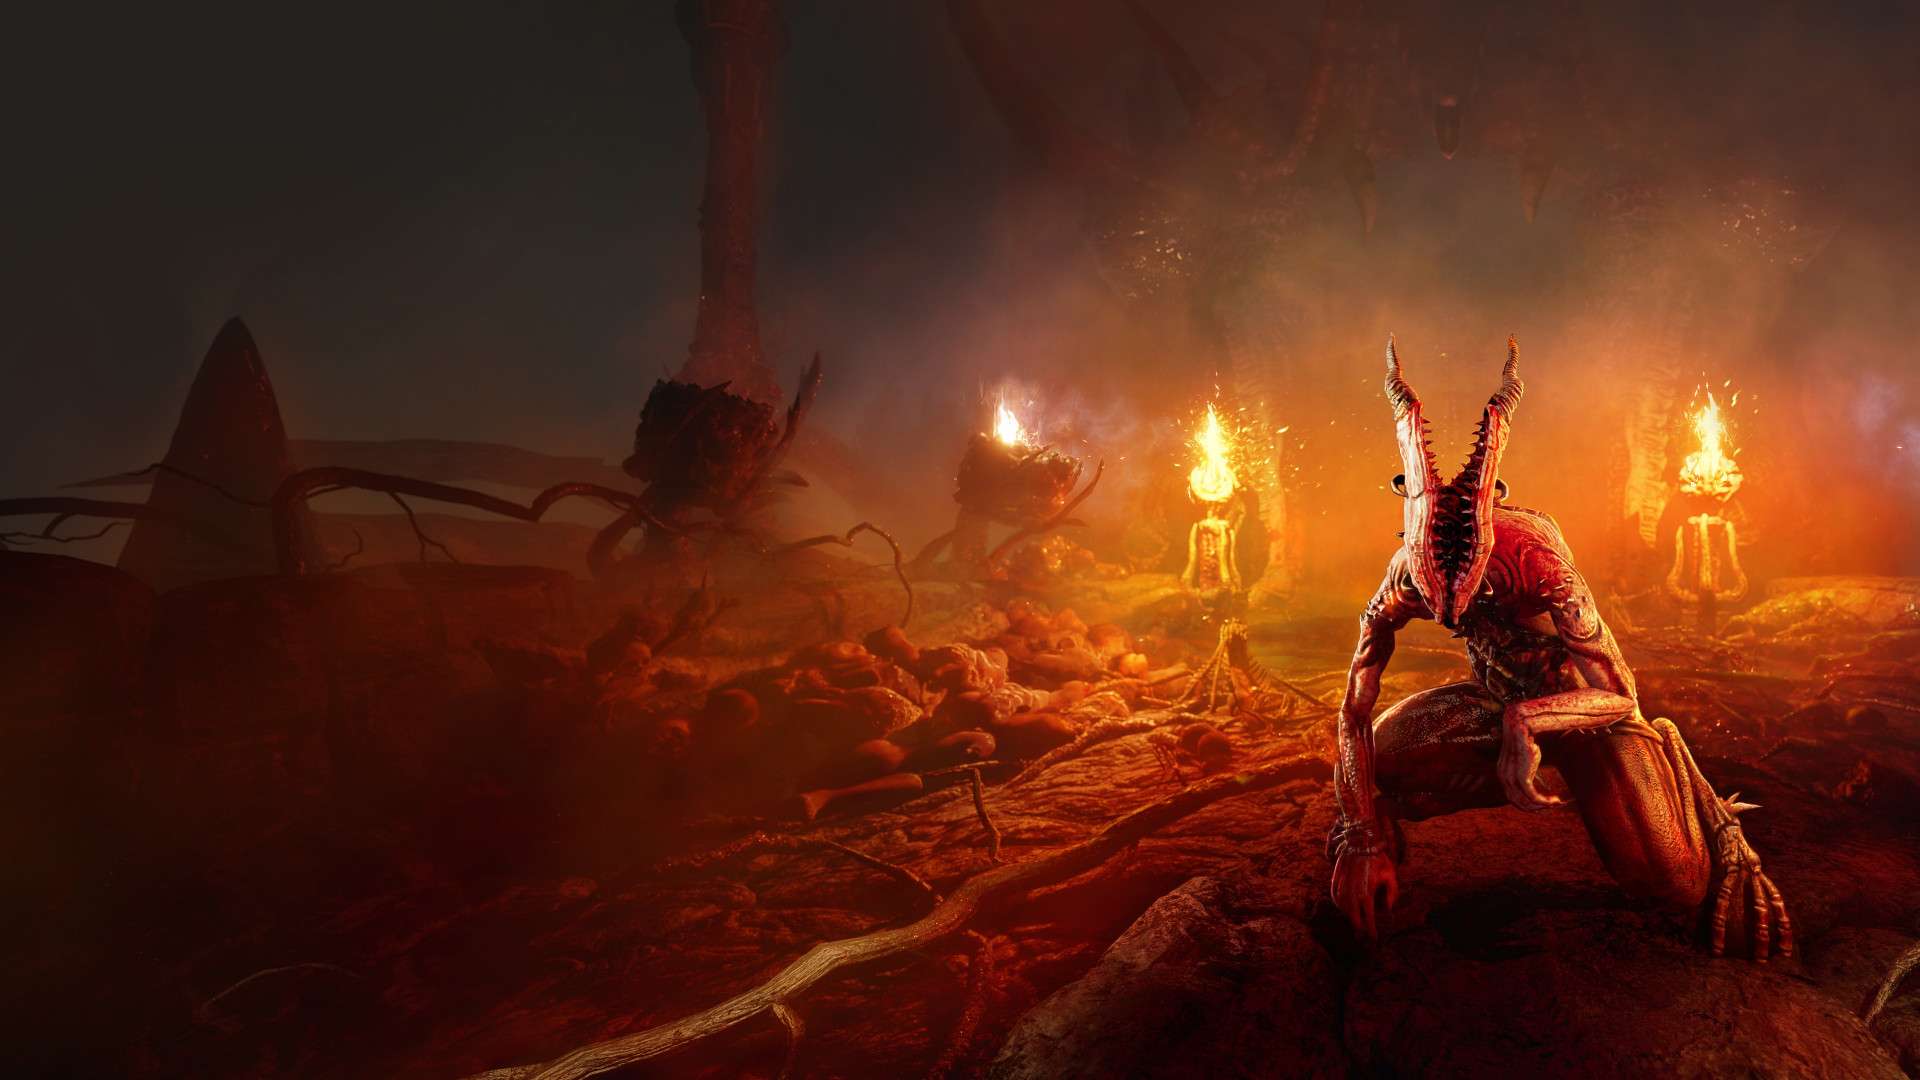 Agony, the video game wallpaper 1920x1080